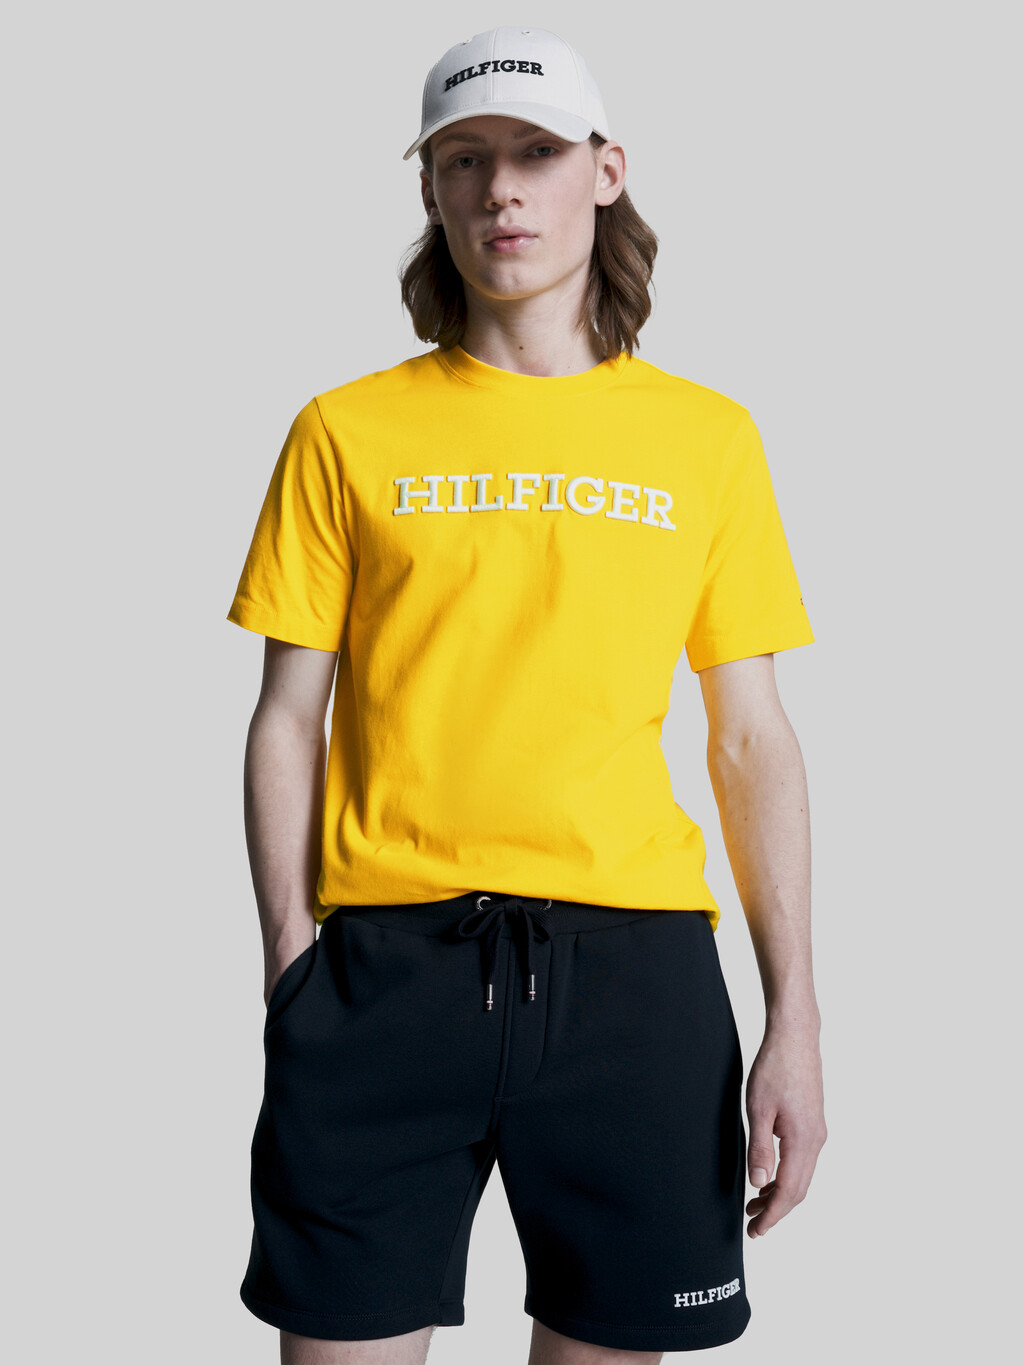 Hilfiger Monotype Embroidery Archive Fit T-Shirt, Vivid Yellow, hi-res